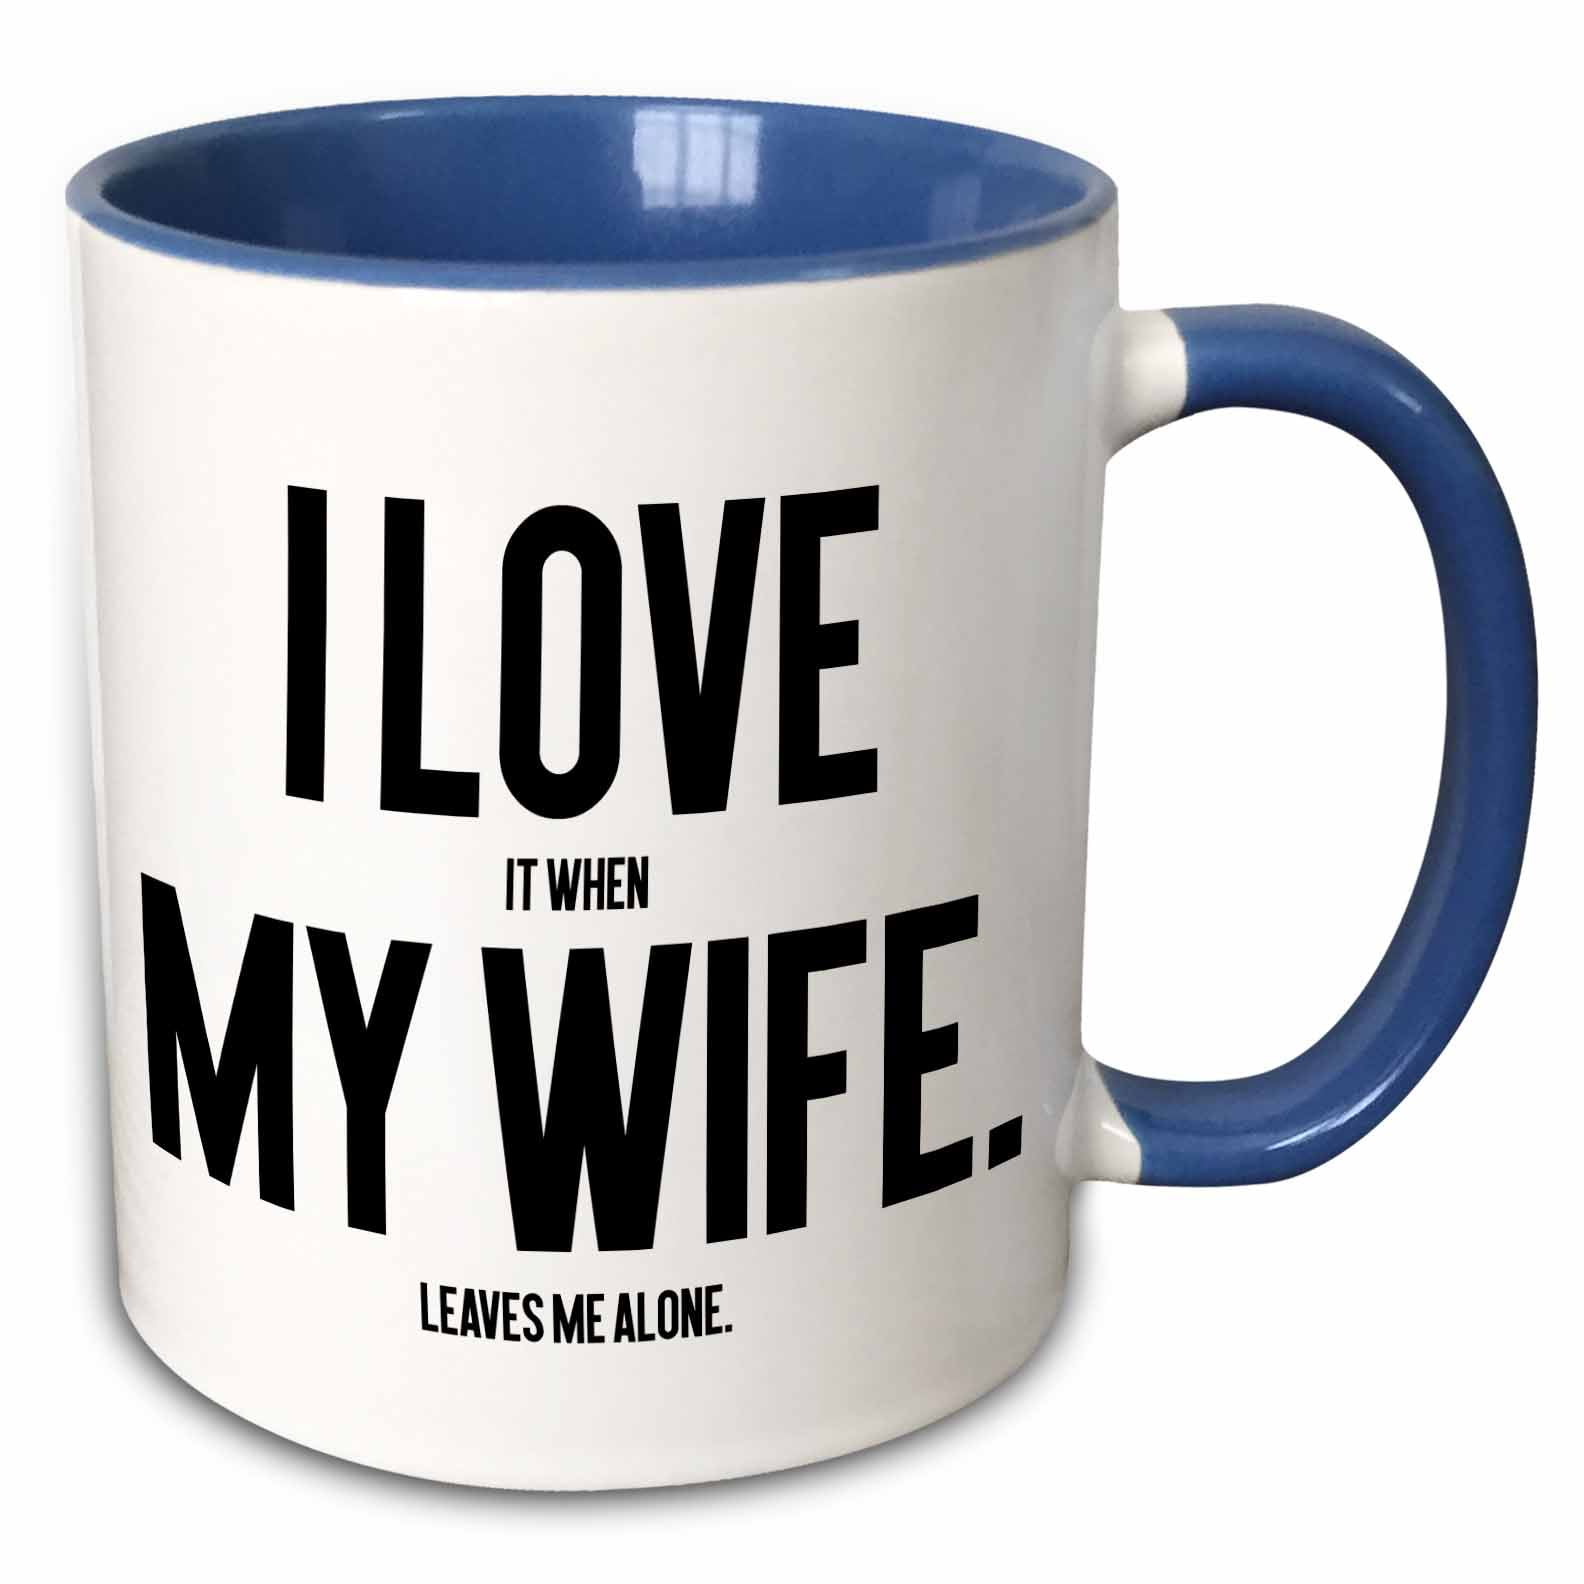 SPECIAL WIFE GIFT 11oz 15oz Mug My Heart Gets Warm And My Love Grows When I Think Of How Special You Are To Wife Present From Husband.